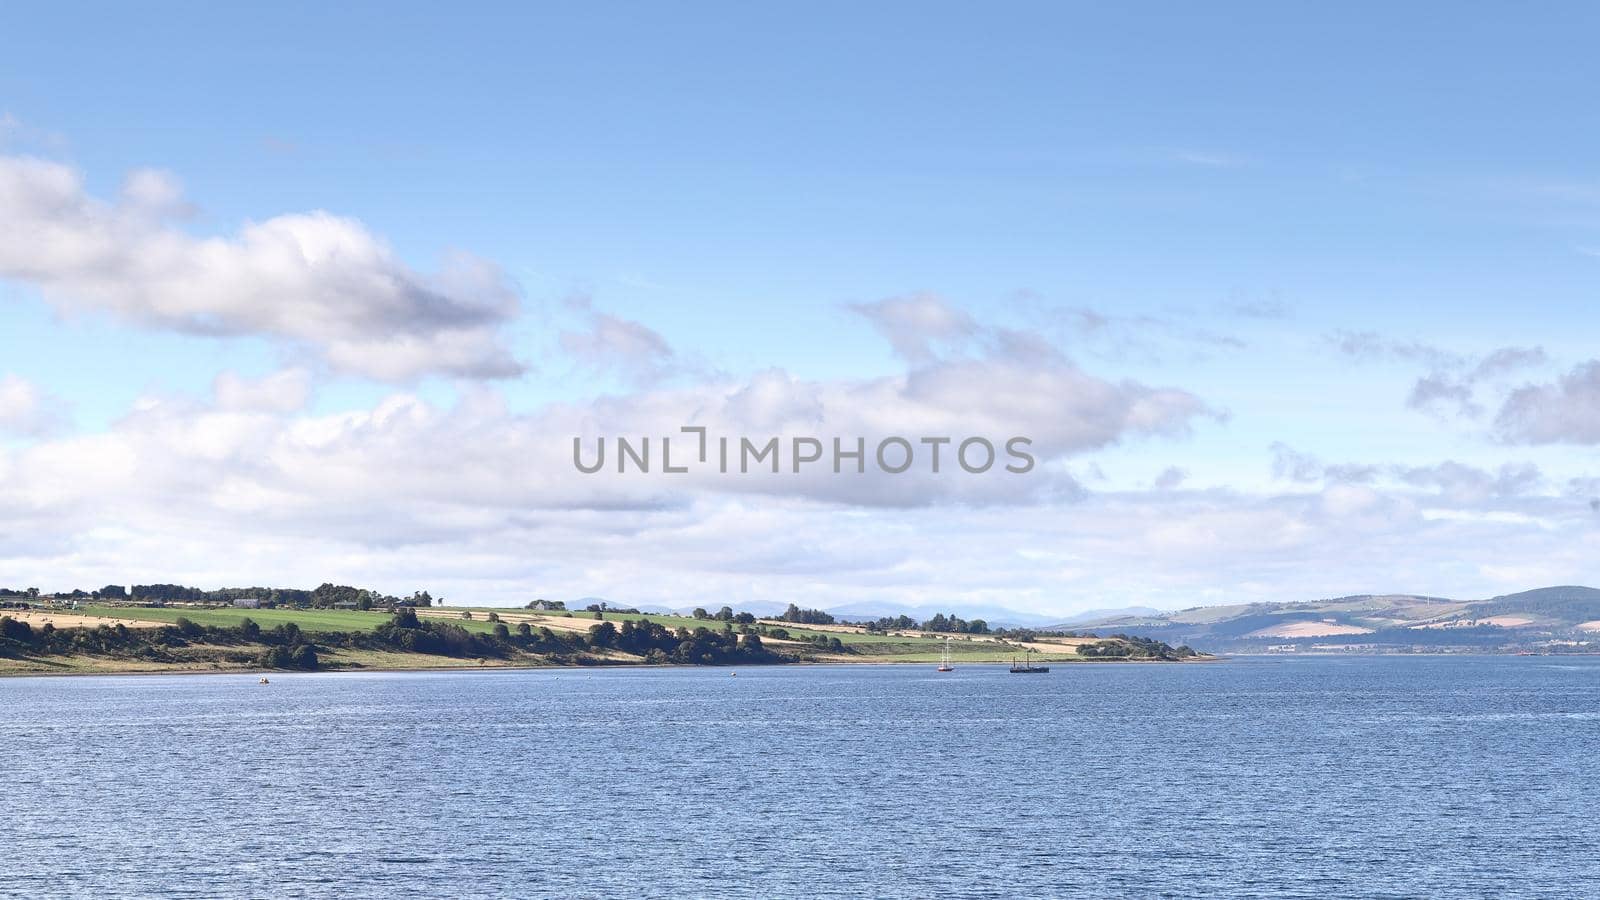 The view from Invergordon across Cromarty Firth to the Black Isle.  The Black Isle is a peninsula within Ross and Cromarty in the Scottish Highlands.